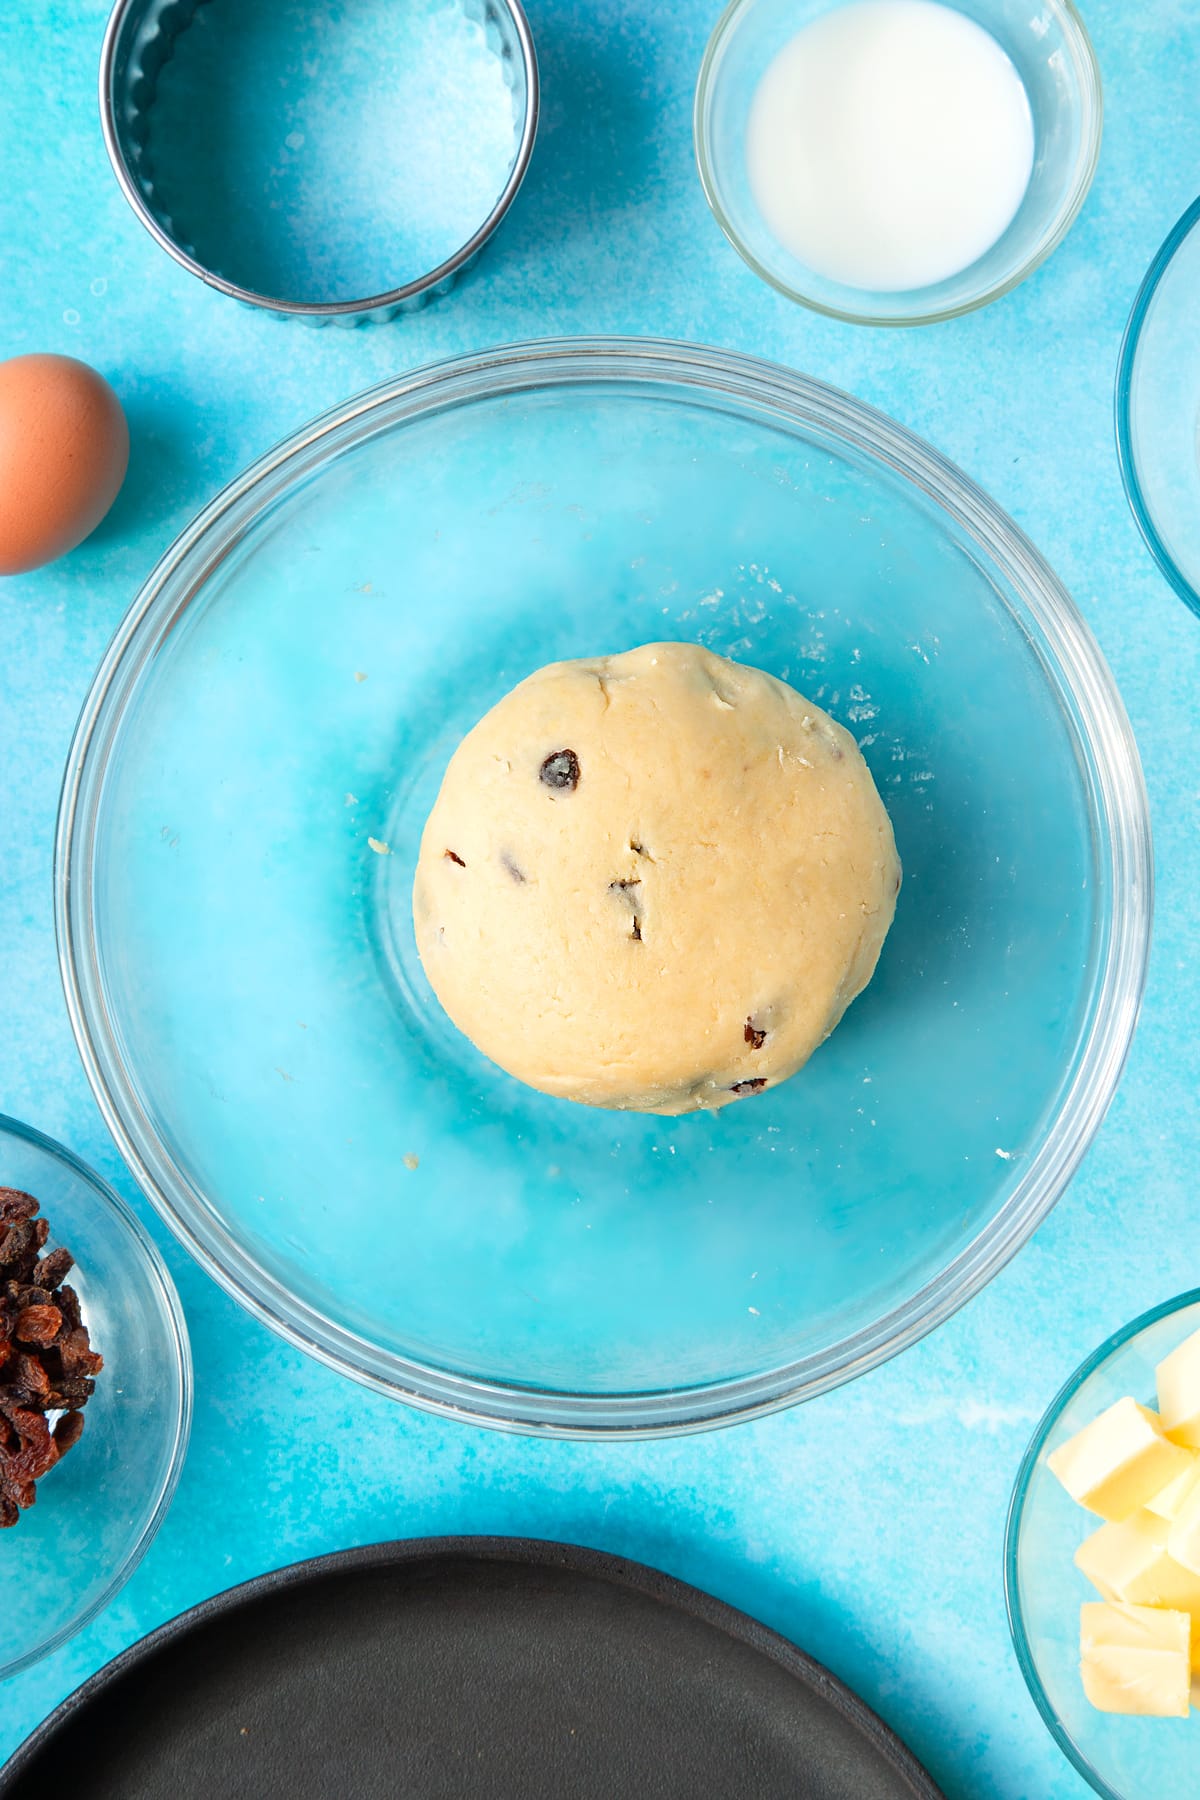 A dough made from flour, butter, egg, sugar and sultanas in a bowl. Ingredients and equipment to make Welsh cakes surround the bowl.